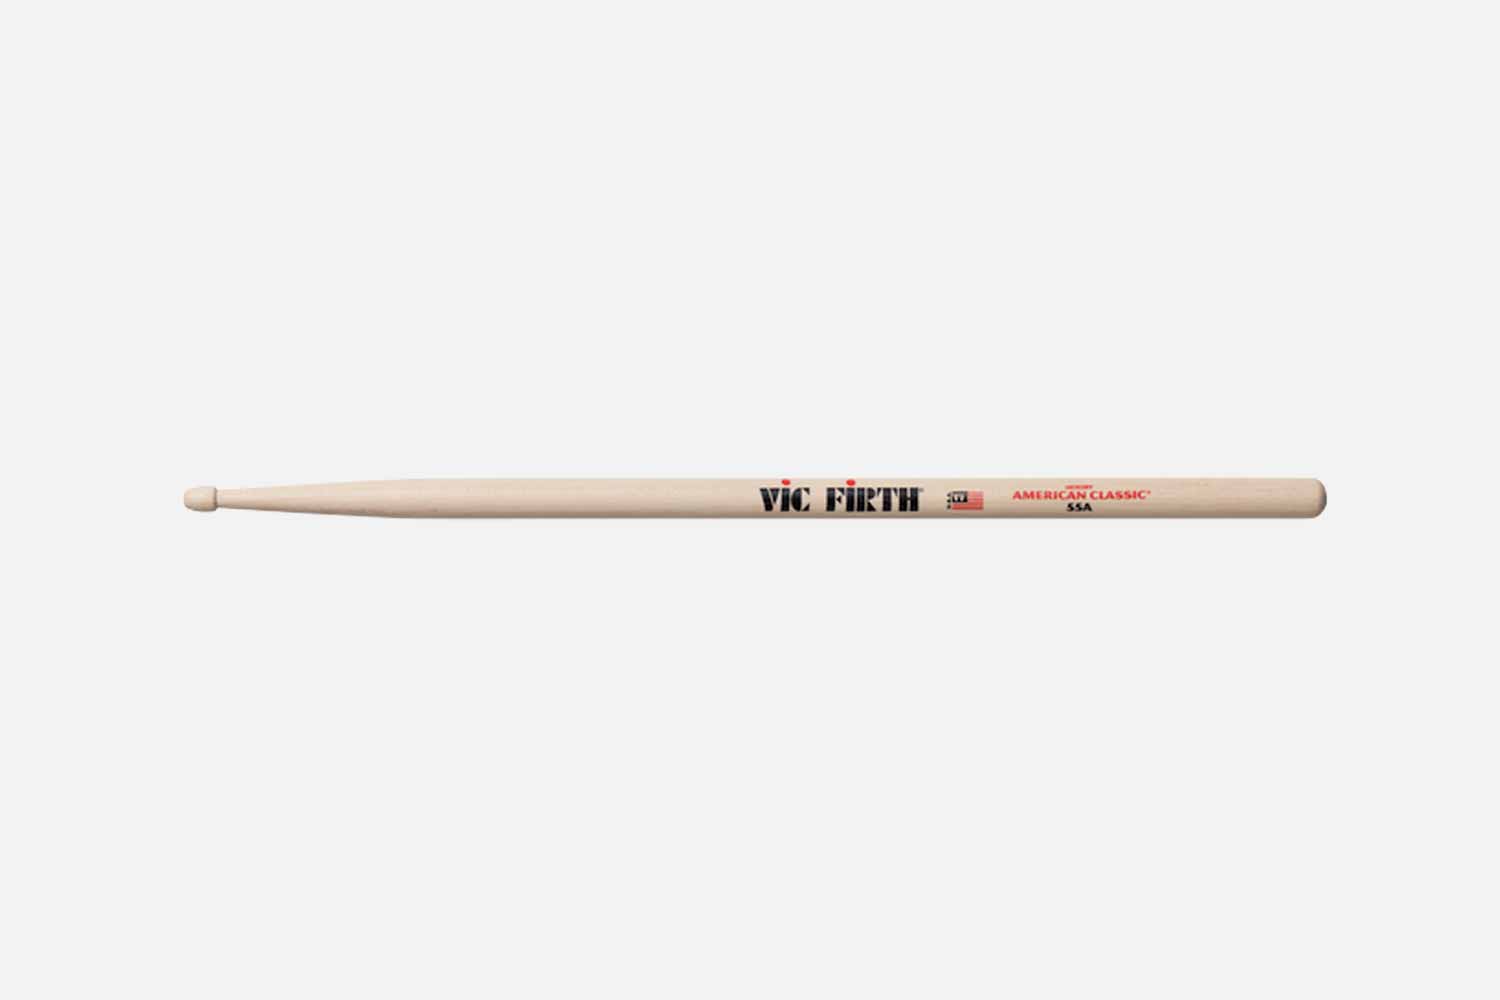 Vic firth 55A American Classic Hickory (5461324234916)